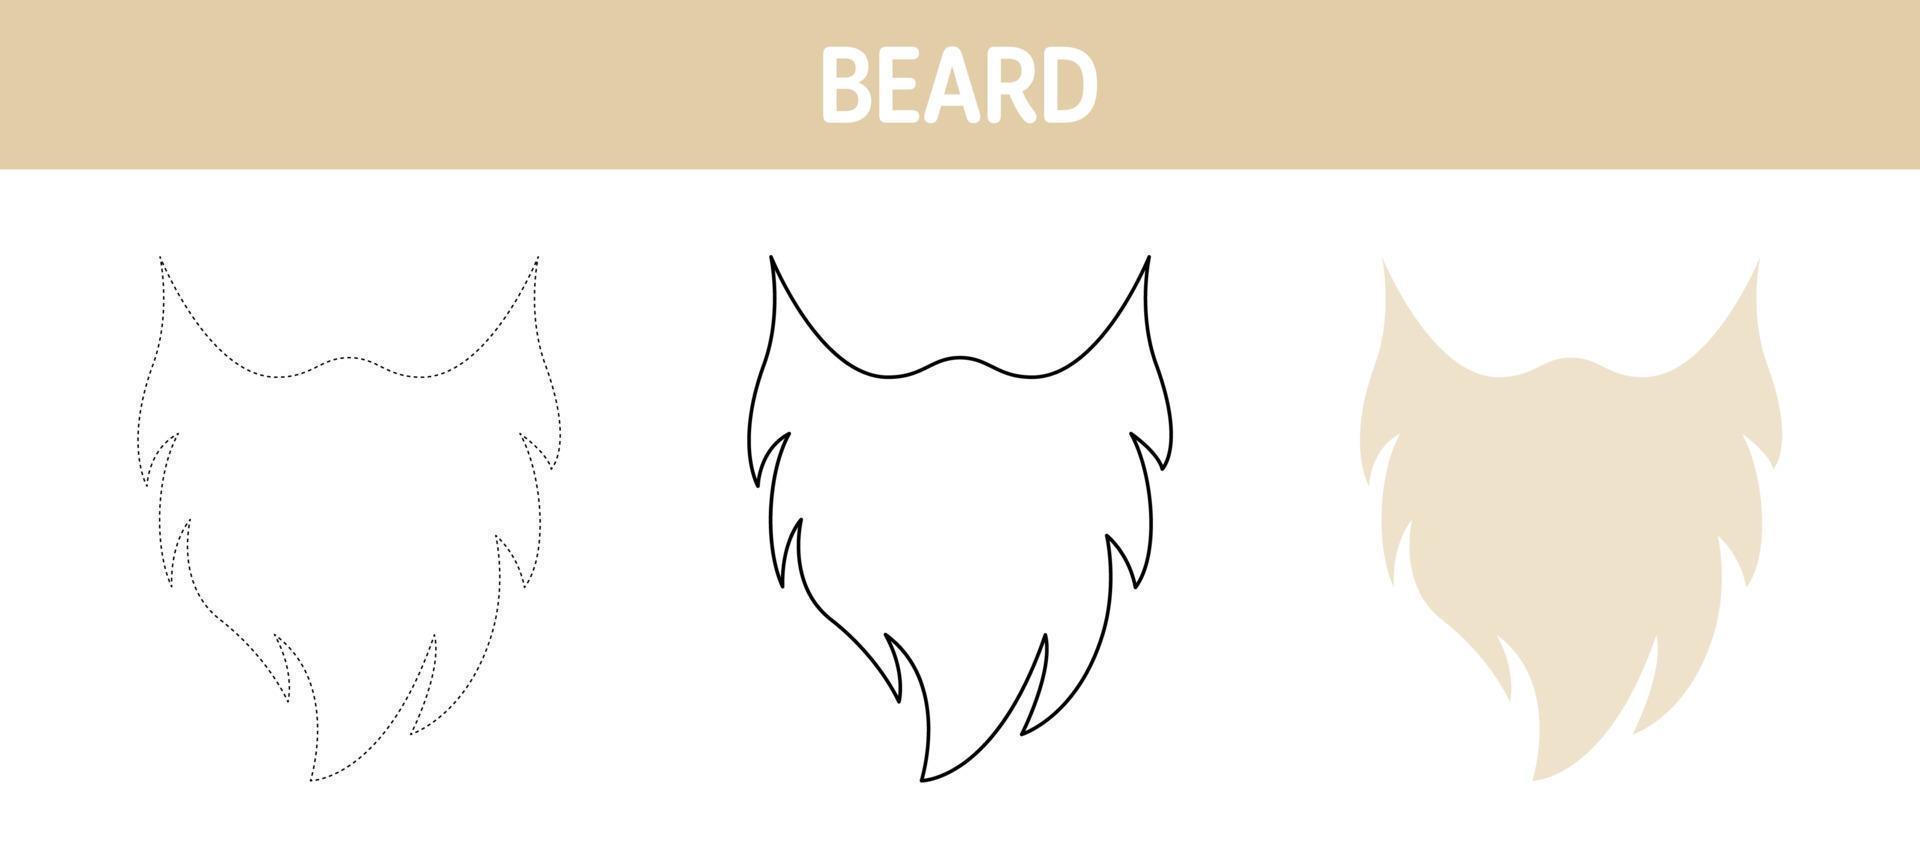 Beard tracing and coloring worksheet for kids vector